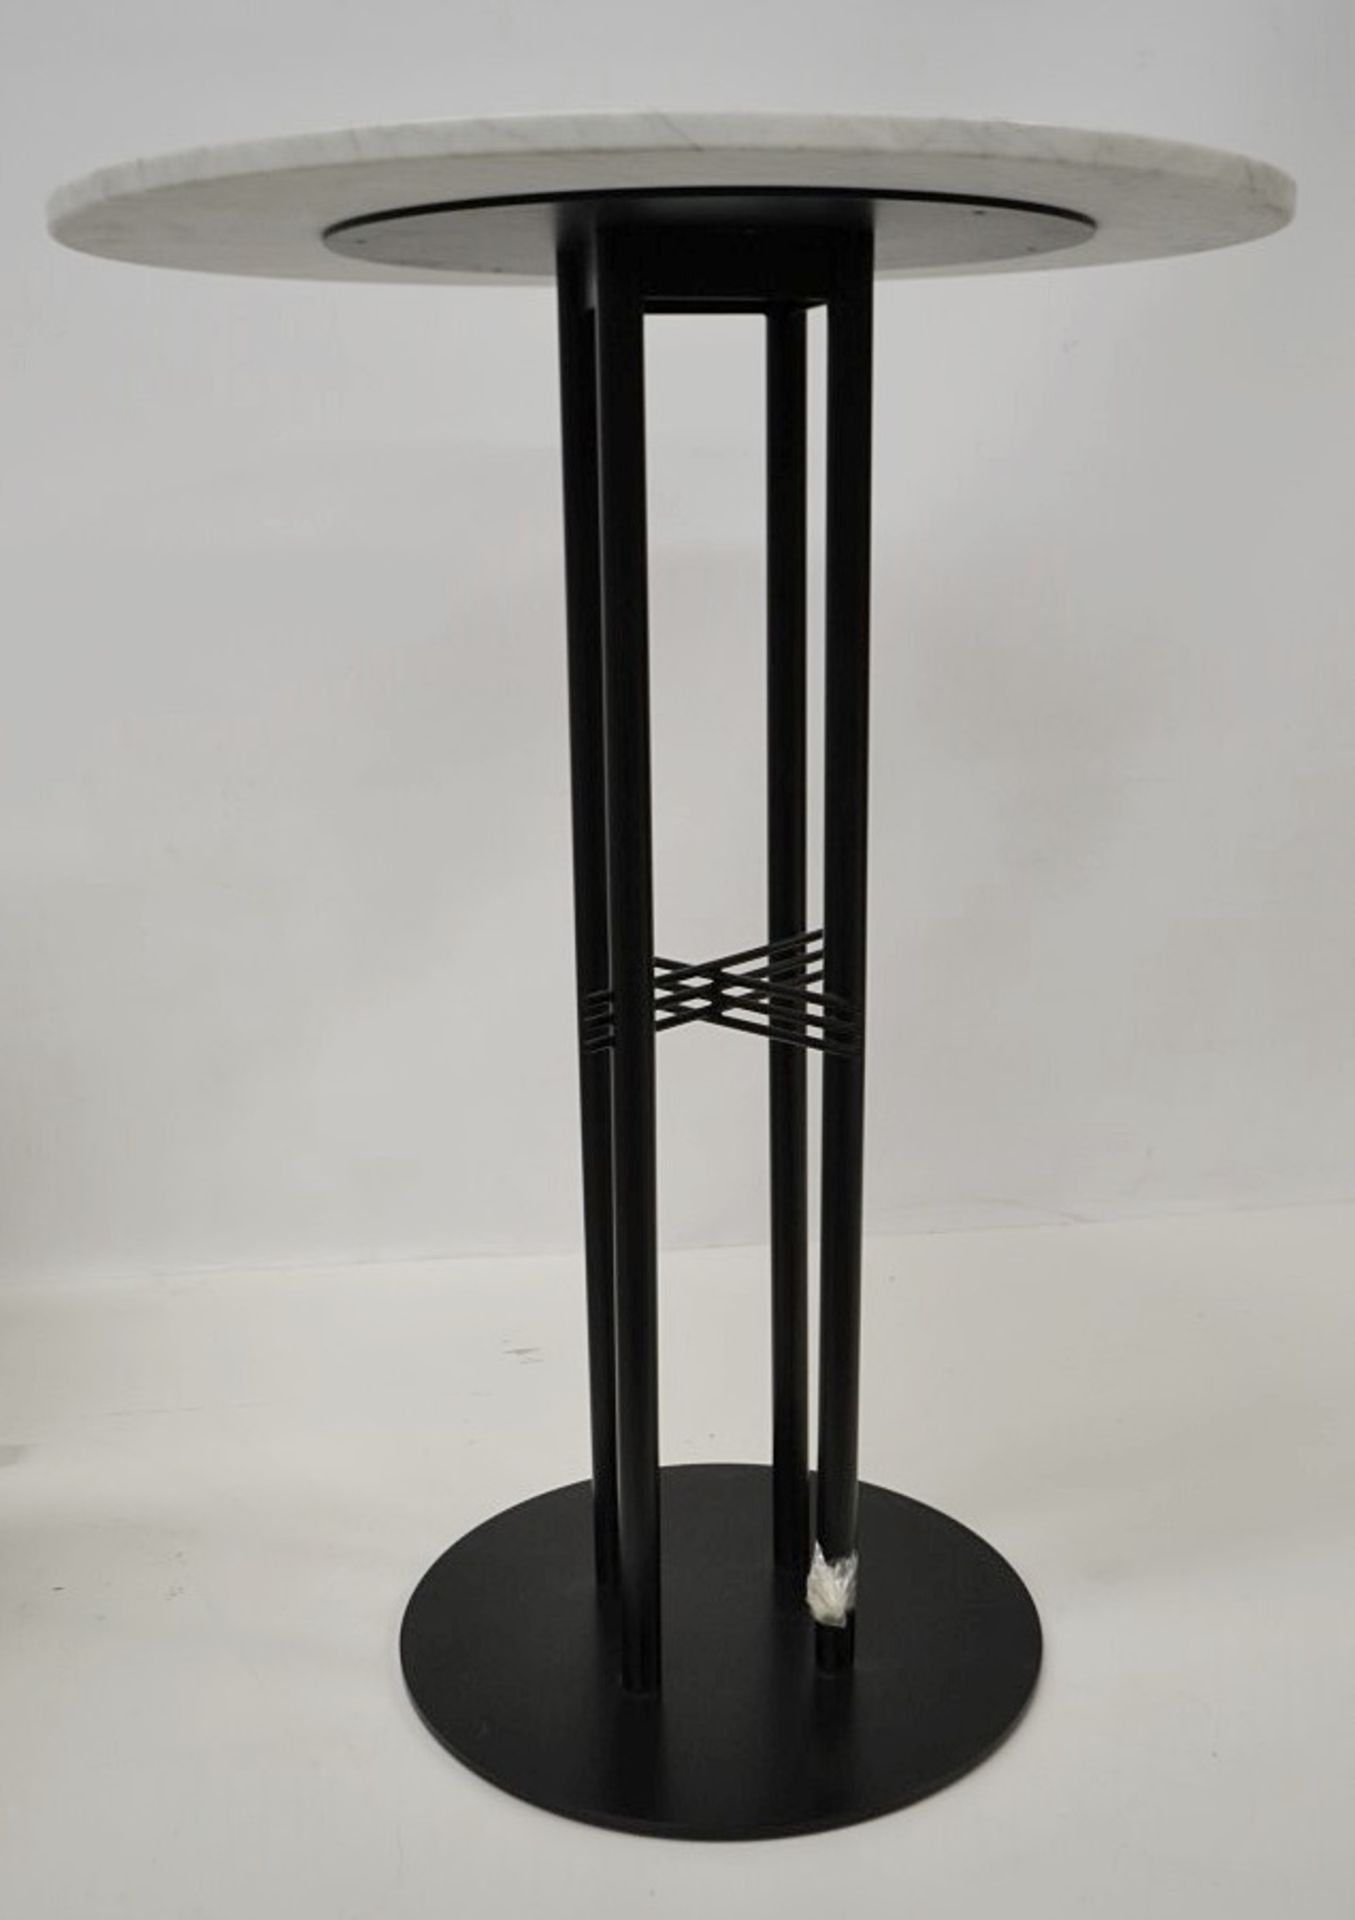 1 x GUBI 'TS Column' Designer Bar Table With A Carrera White Marble Top And Base - RRP £1,230.00 - Image 2 of 4